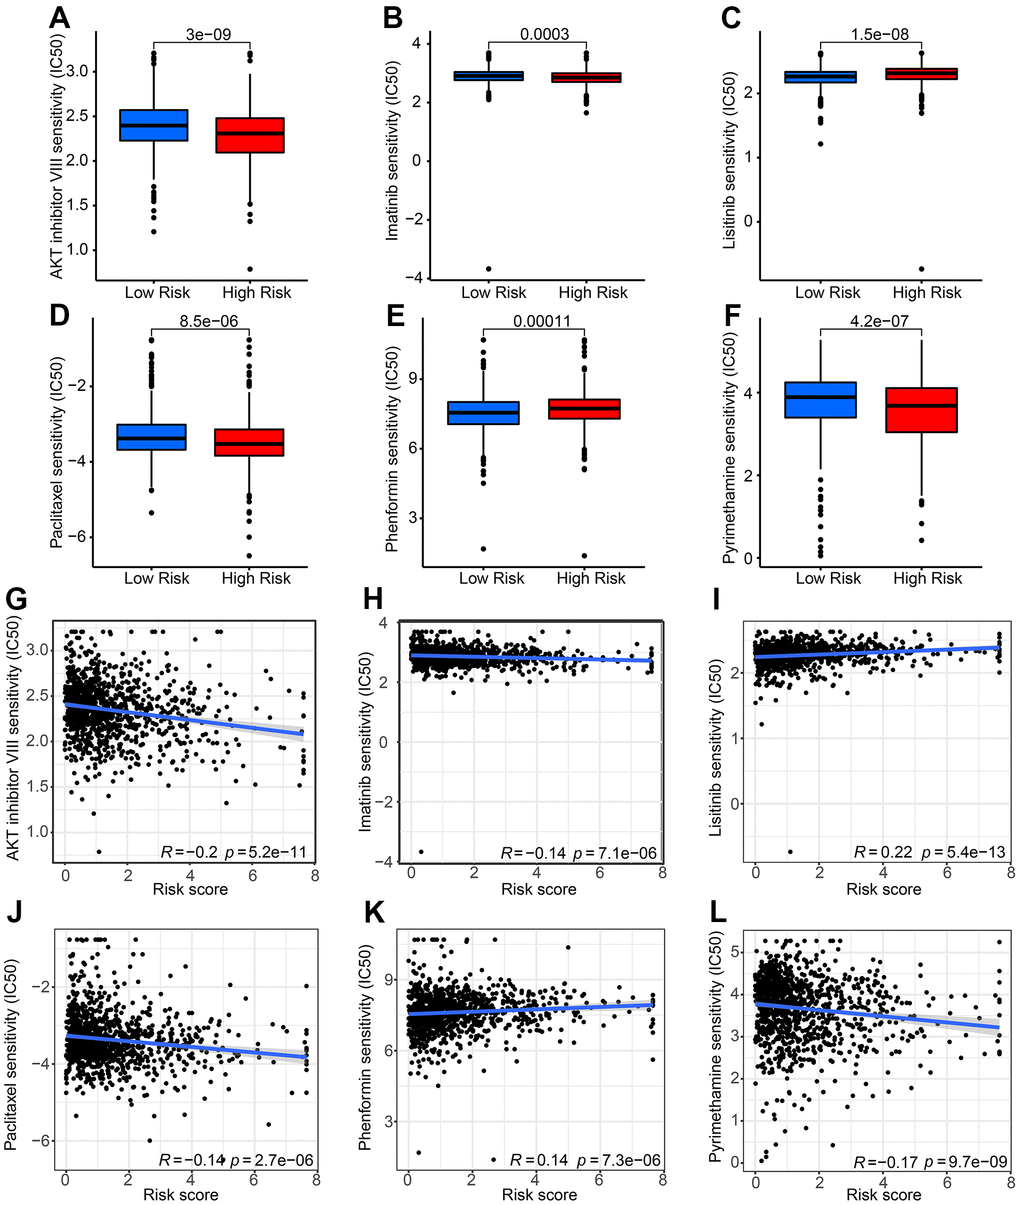 Drug sensitivity analysis of patients with breast cancer in low-risk group and high-risk group. The distribution of IC50 values shows a significant difference between patients in the low-group and high-risk group among (A) AKT inhibitor VIII, (B) imatinib, (C) linsitinib, (D) paclitaxel, (E) phenformin, and (F) pyrimethamine. (G–L) Correlation analysis of risk score and drug sensitivity.